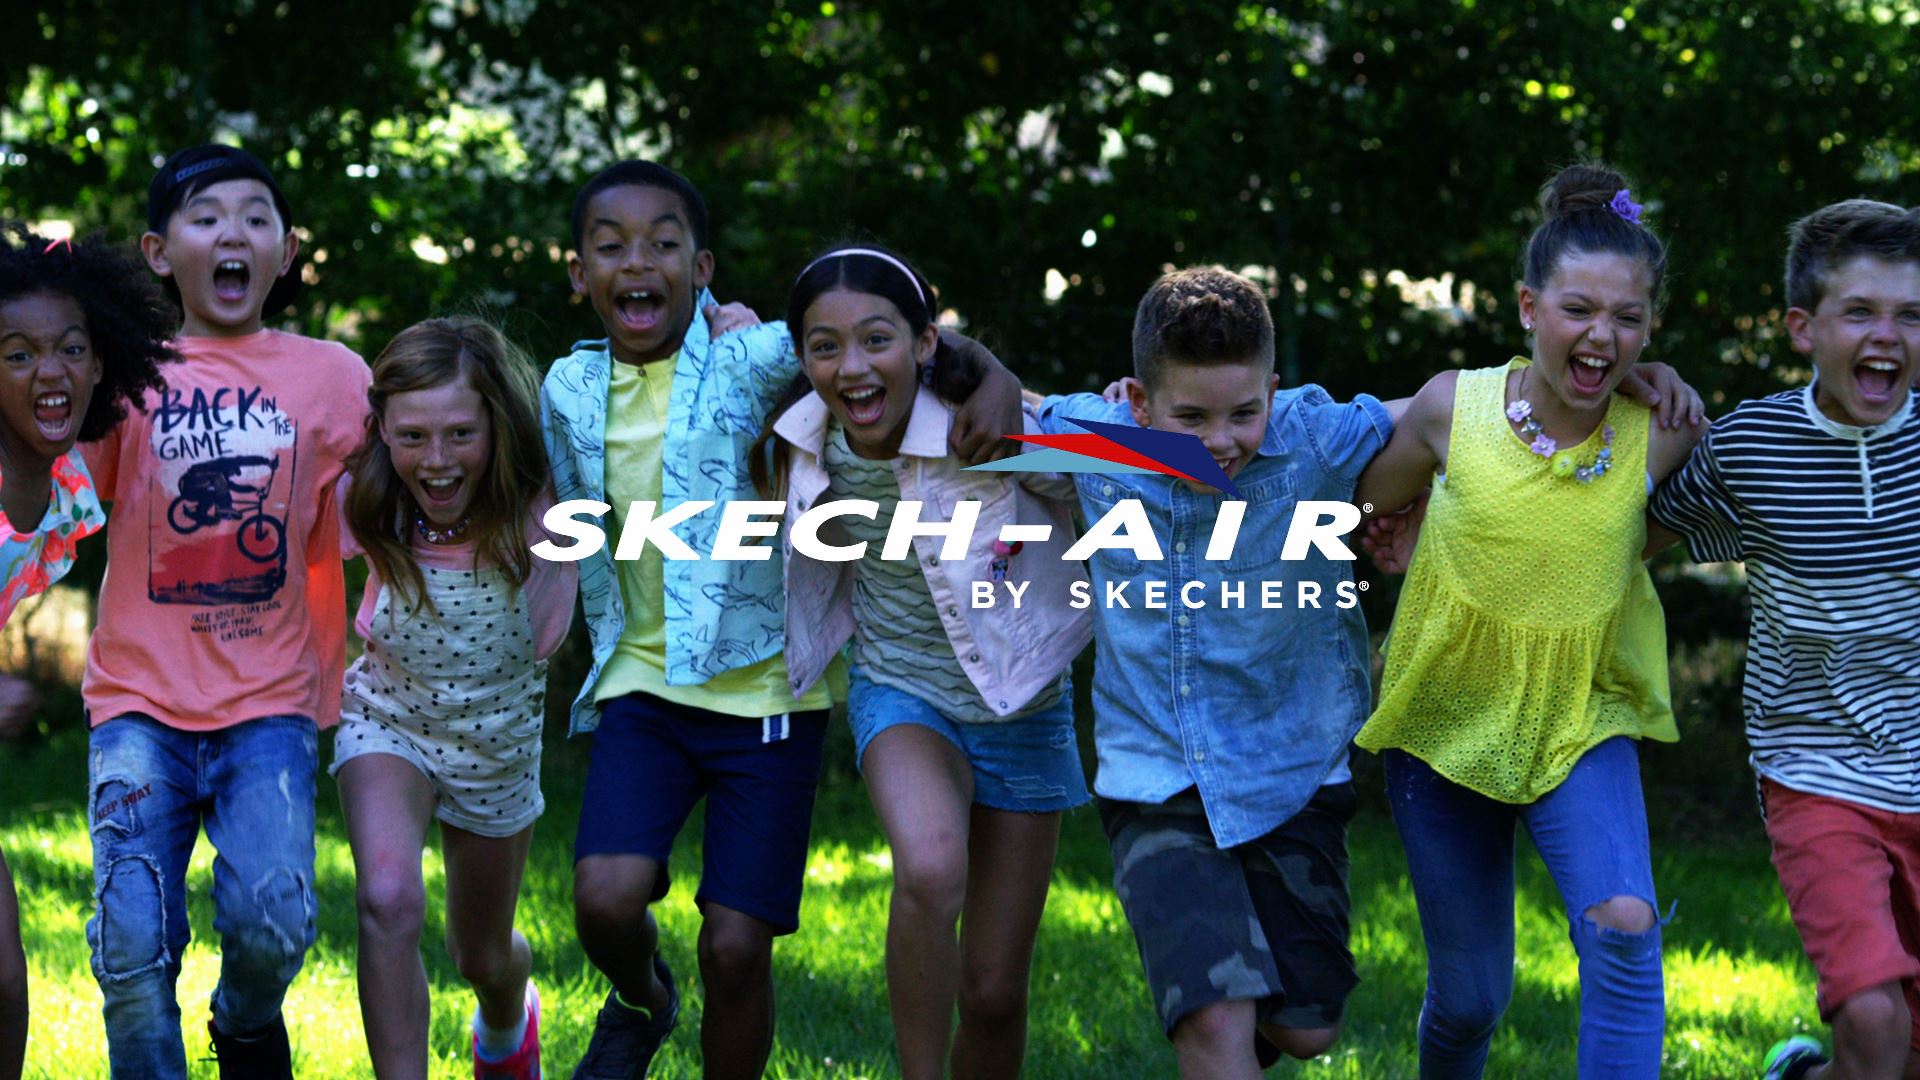 View All Skechers Commercials